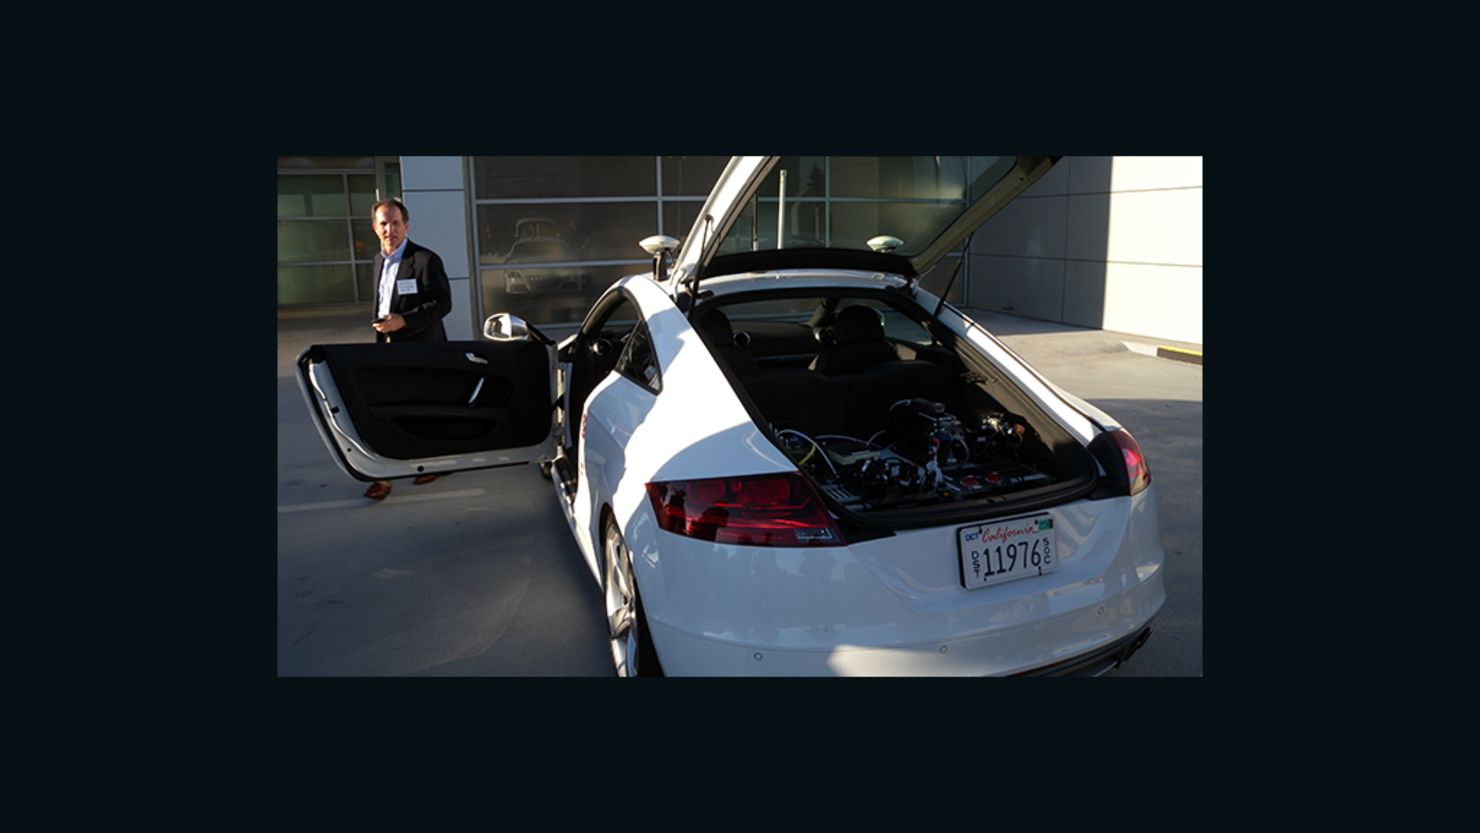 Stanford University's driverless car, an Audi TTS named Shelley, has hit 115 mph on a closed racetrack.